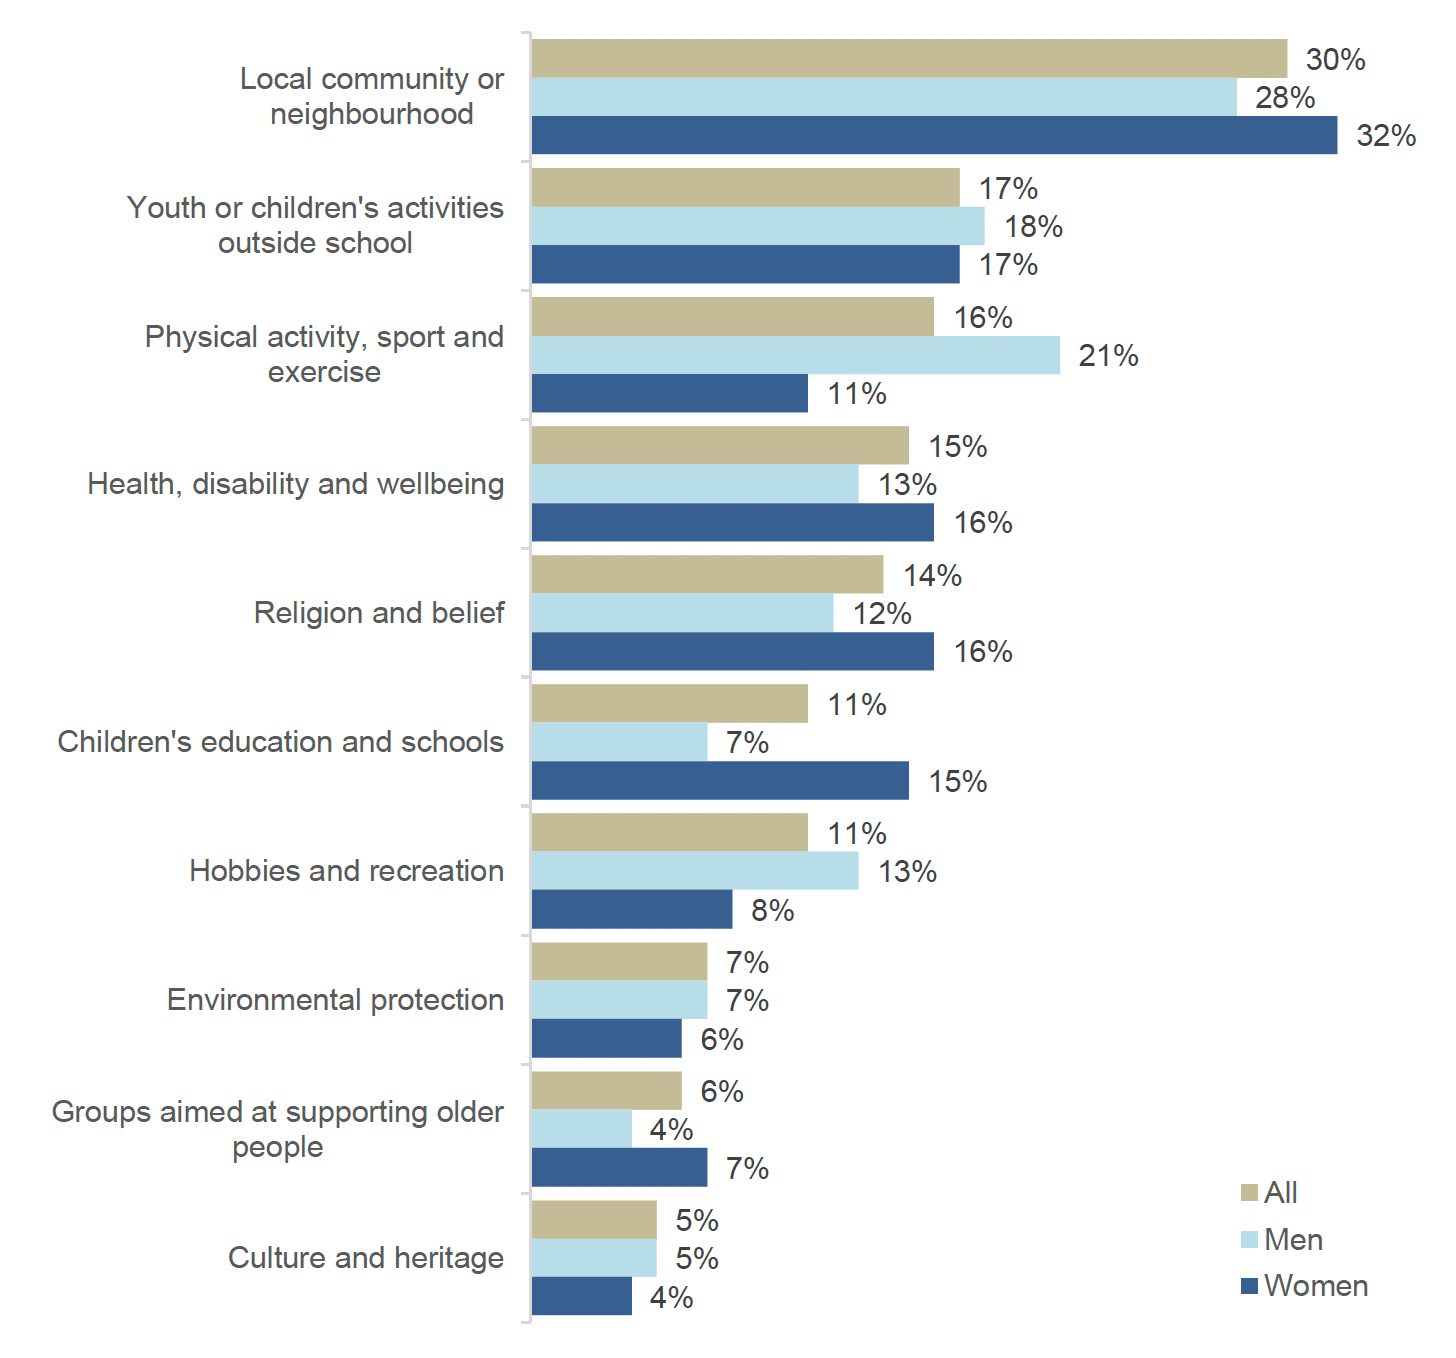 Bar chart showing top ten types of volunteering by gender. The most common for both men and women is local community or neighbourhood volunteering.